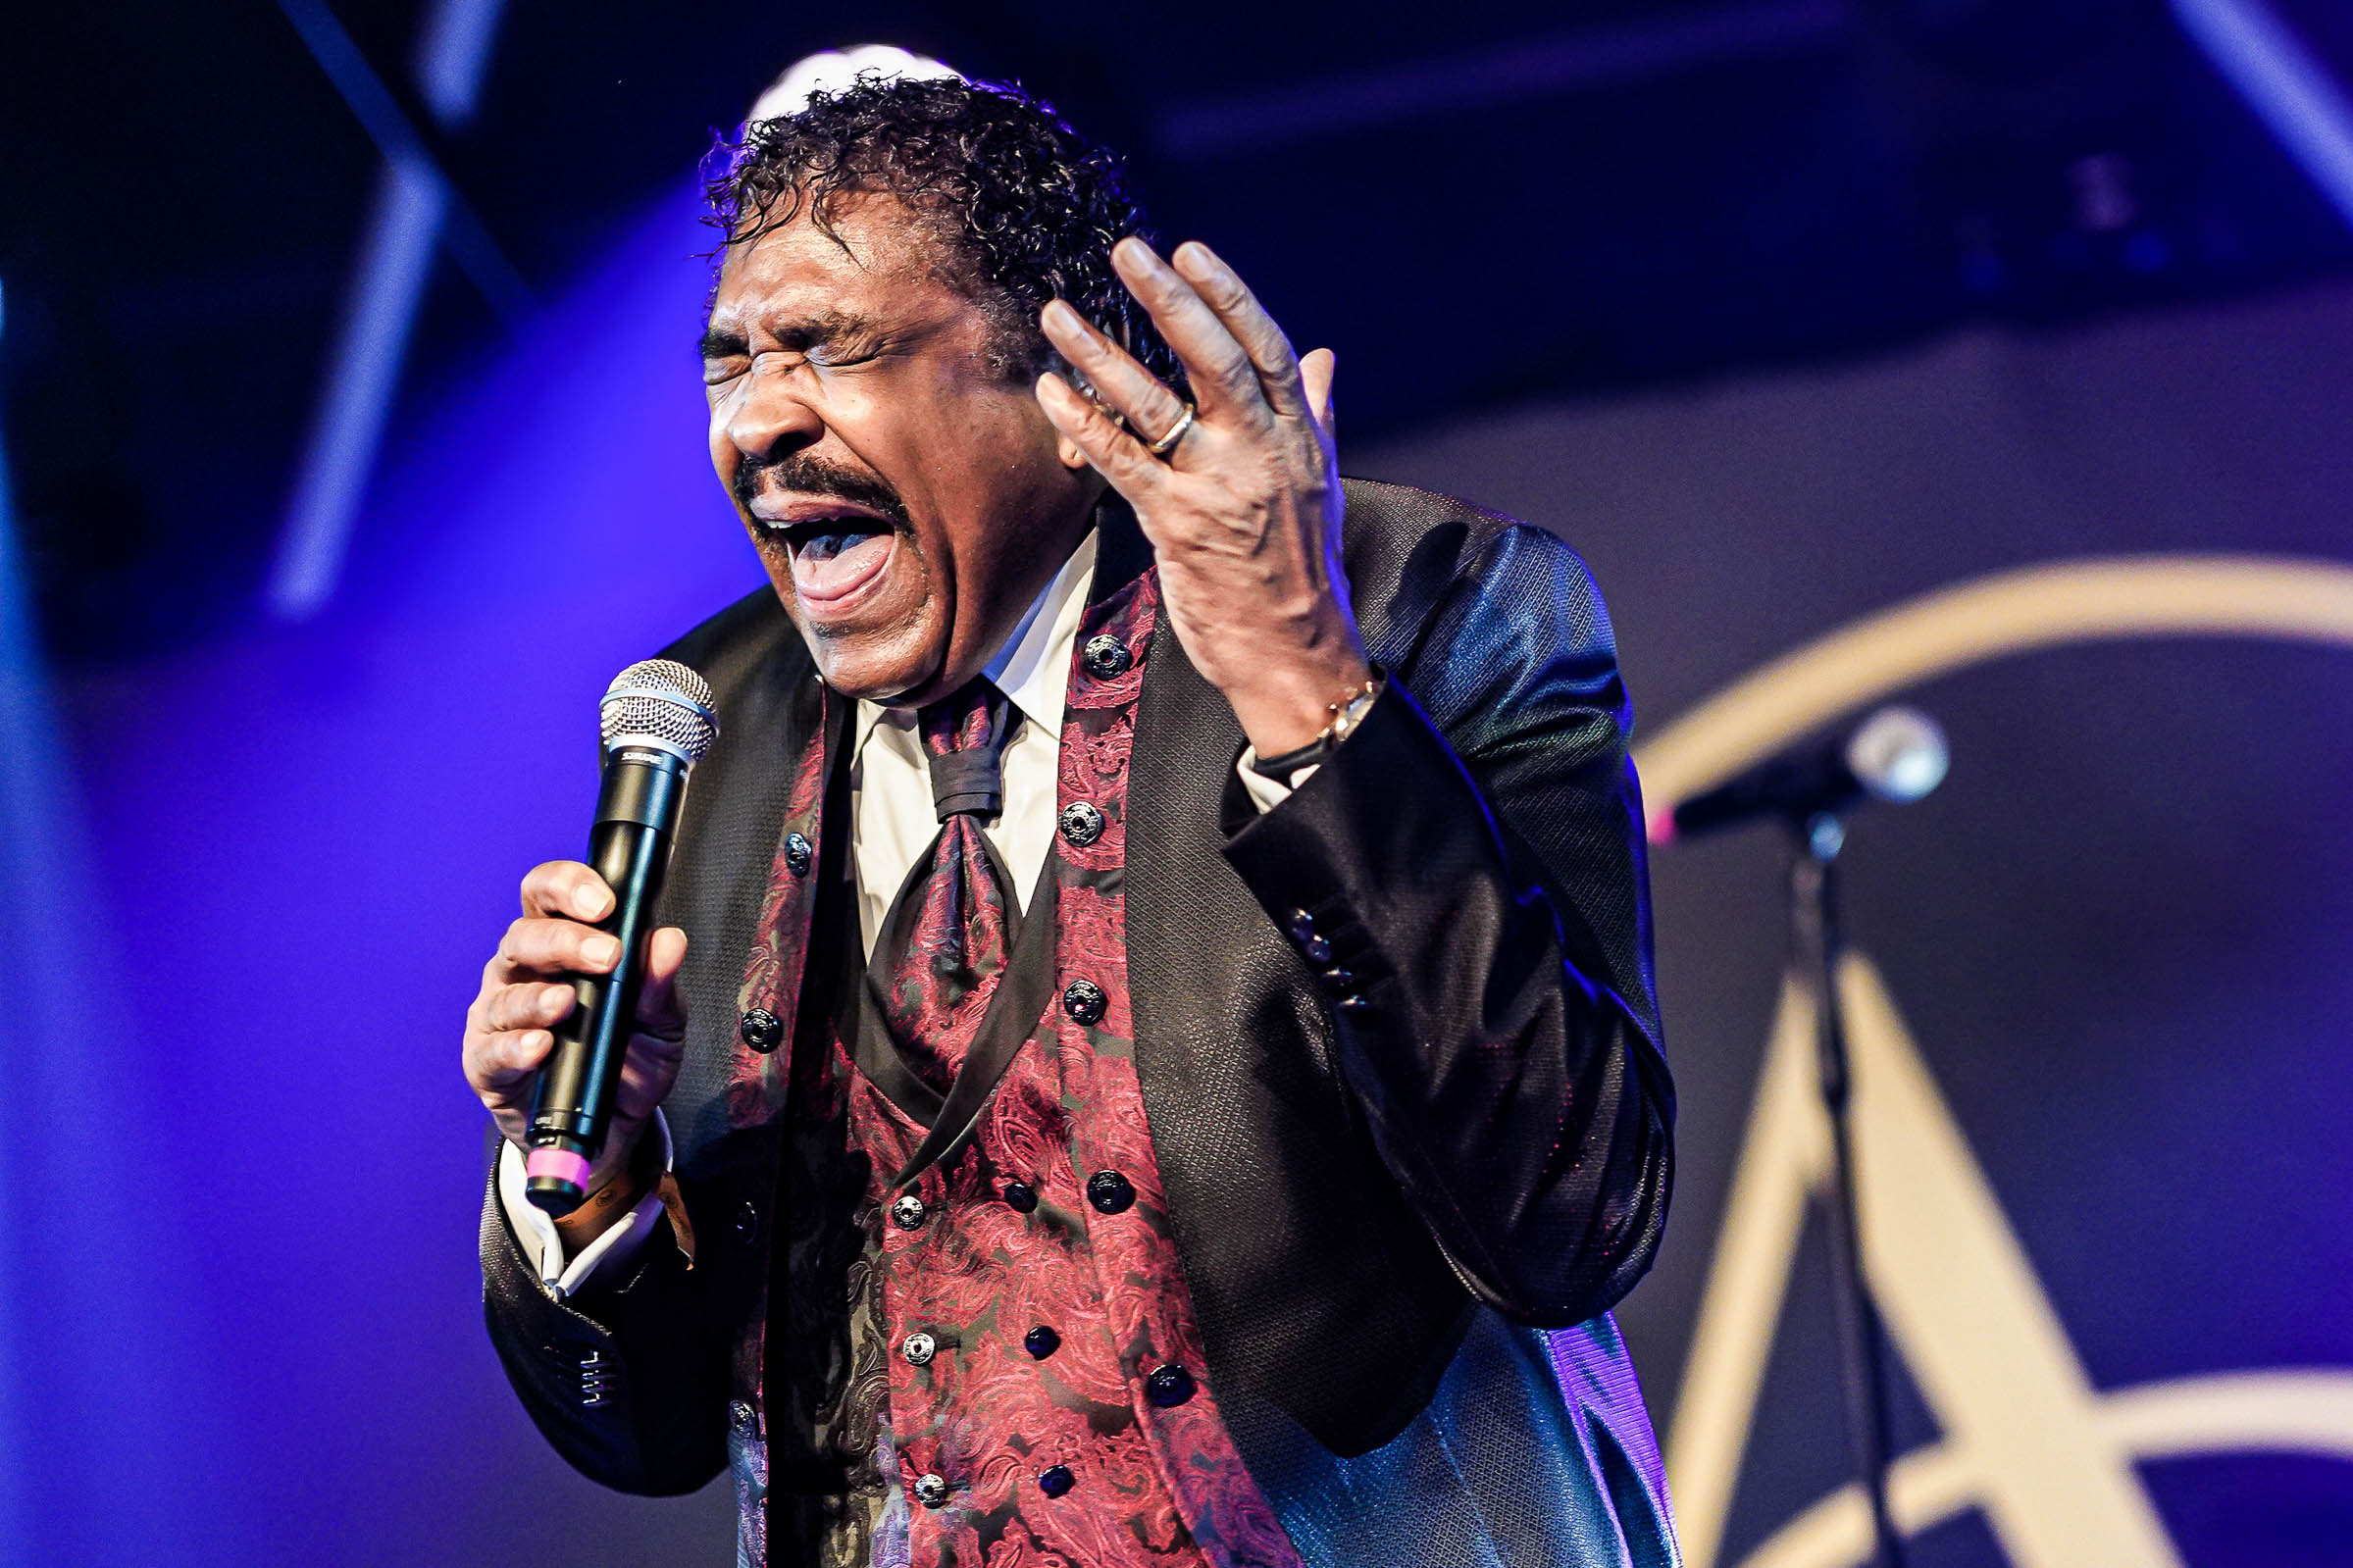 GEORGE MCCRAE, Aspria-Silvesterparty, Hannover, 2020